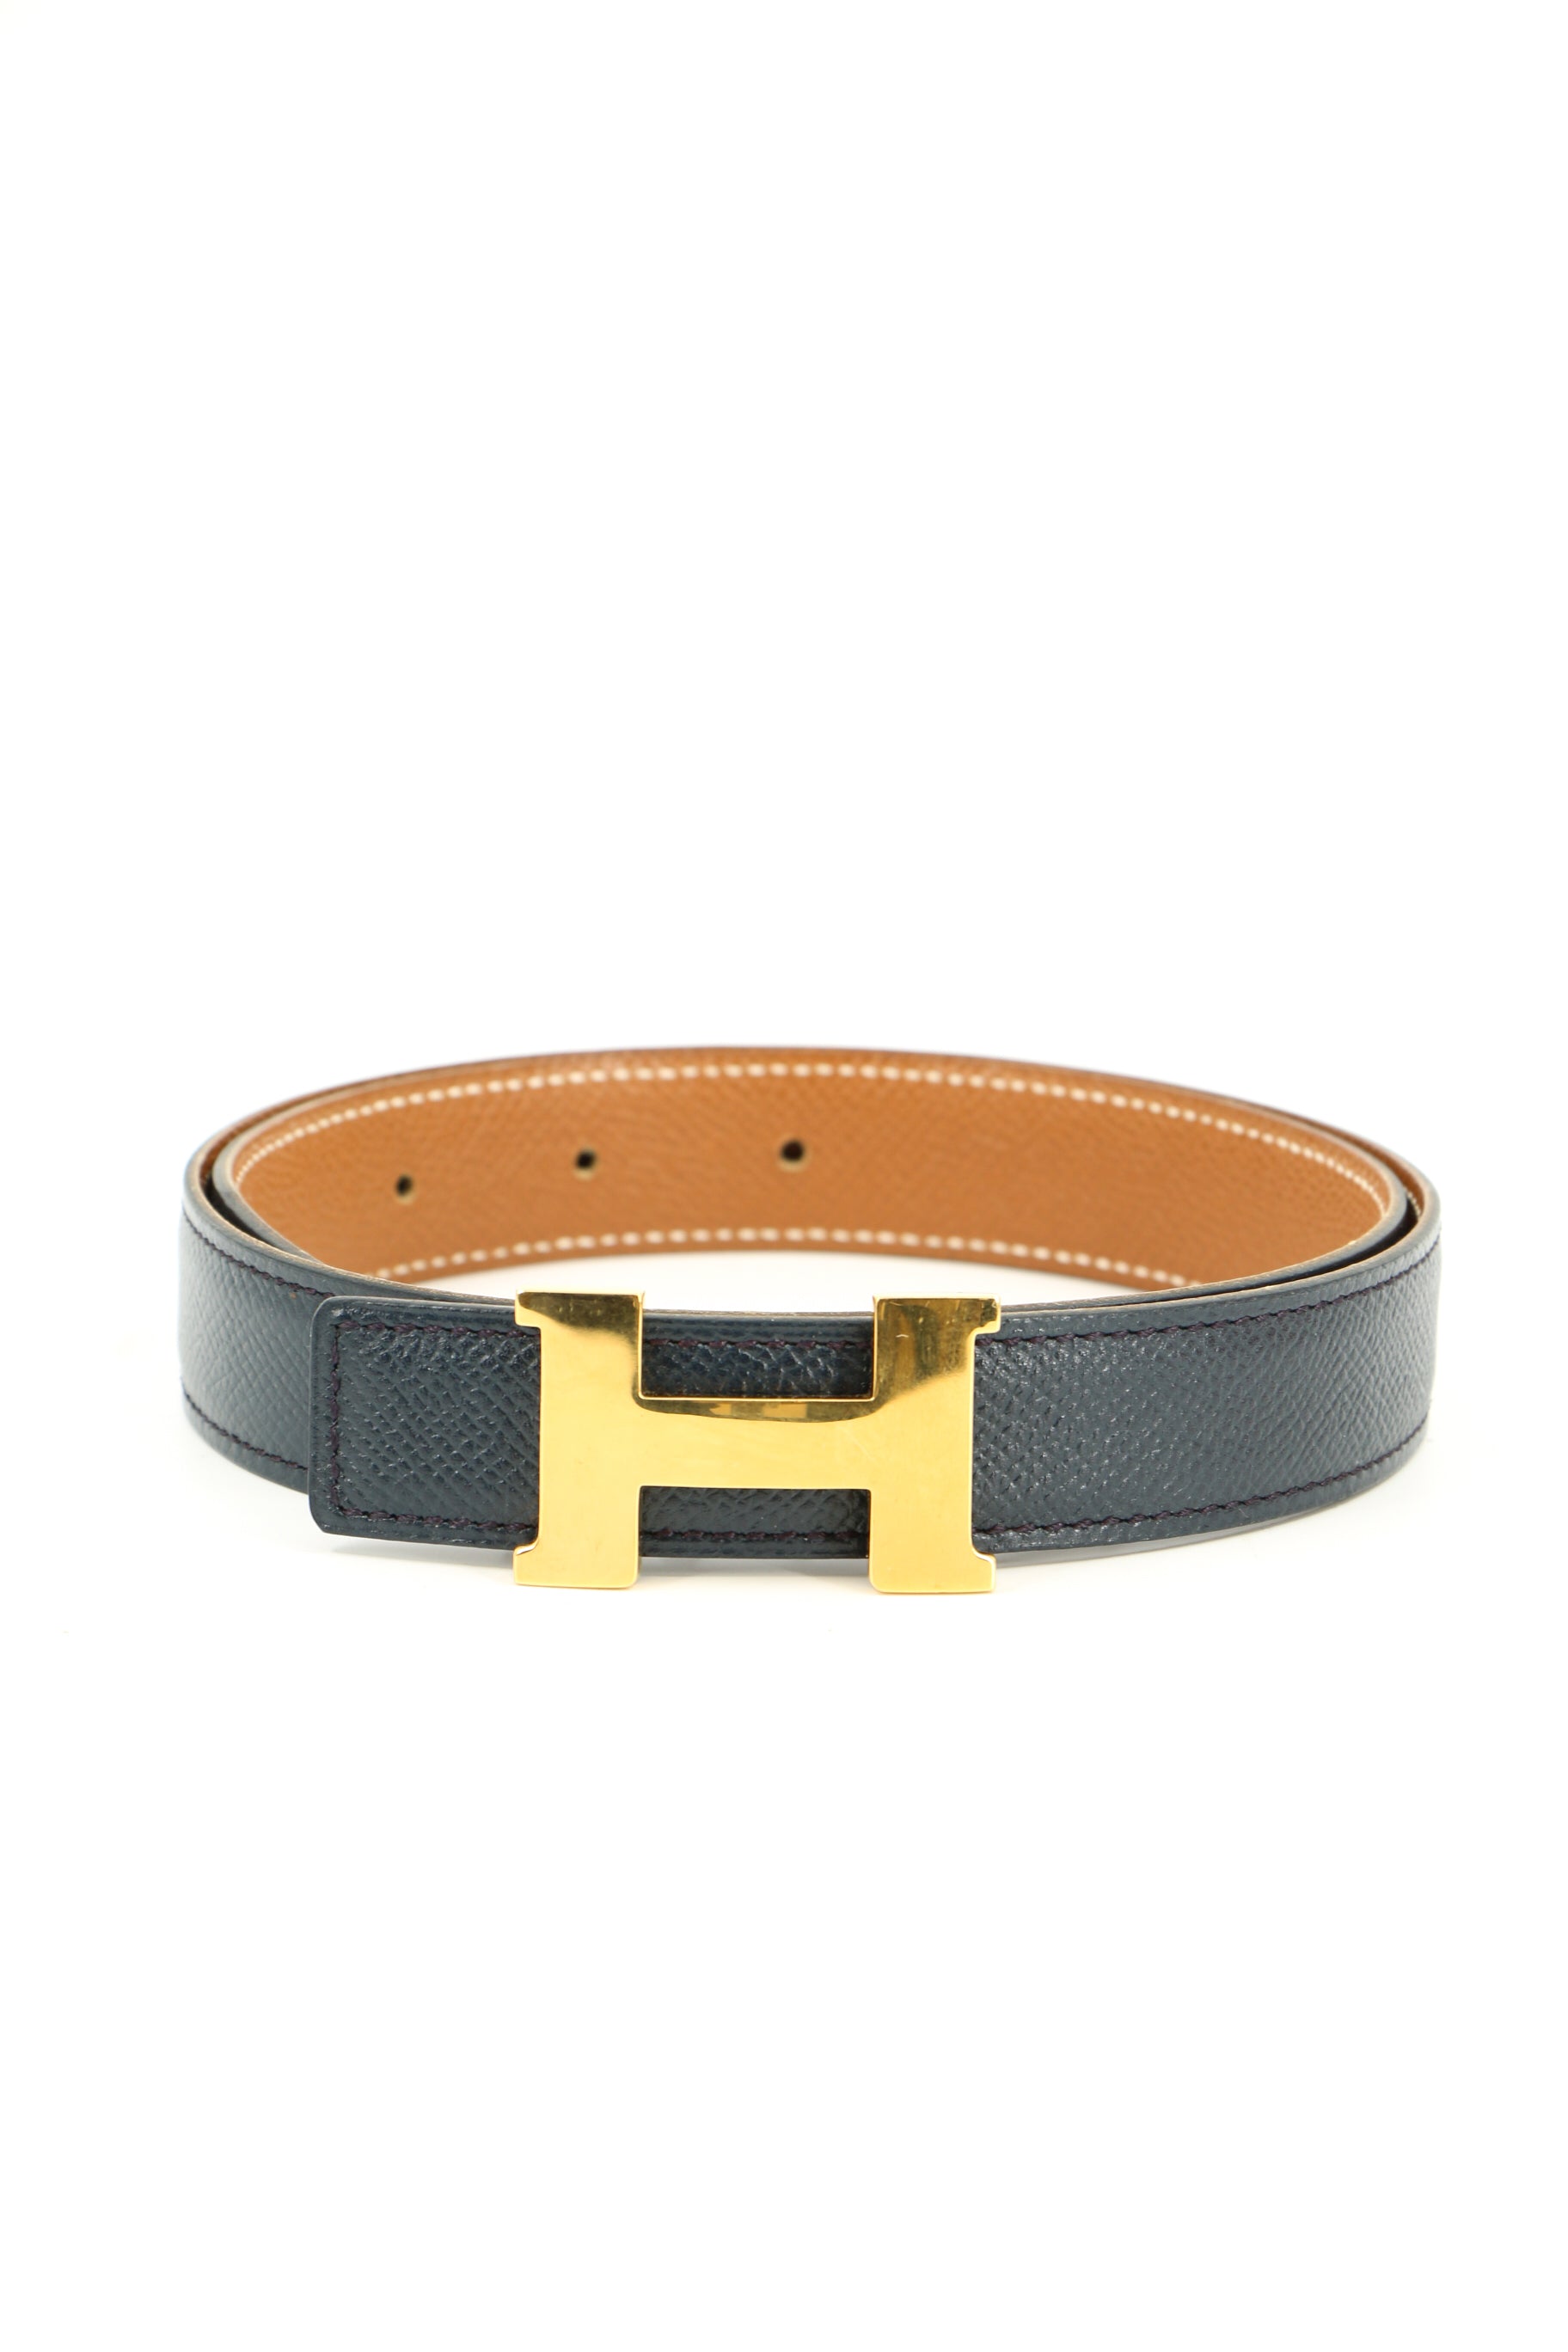 Louis Vuitton - Authenticated Daily Multi Pocket Belt - Leather Brown Plain for Women, Very Good Condition